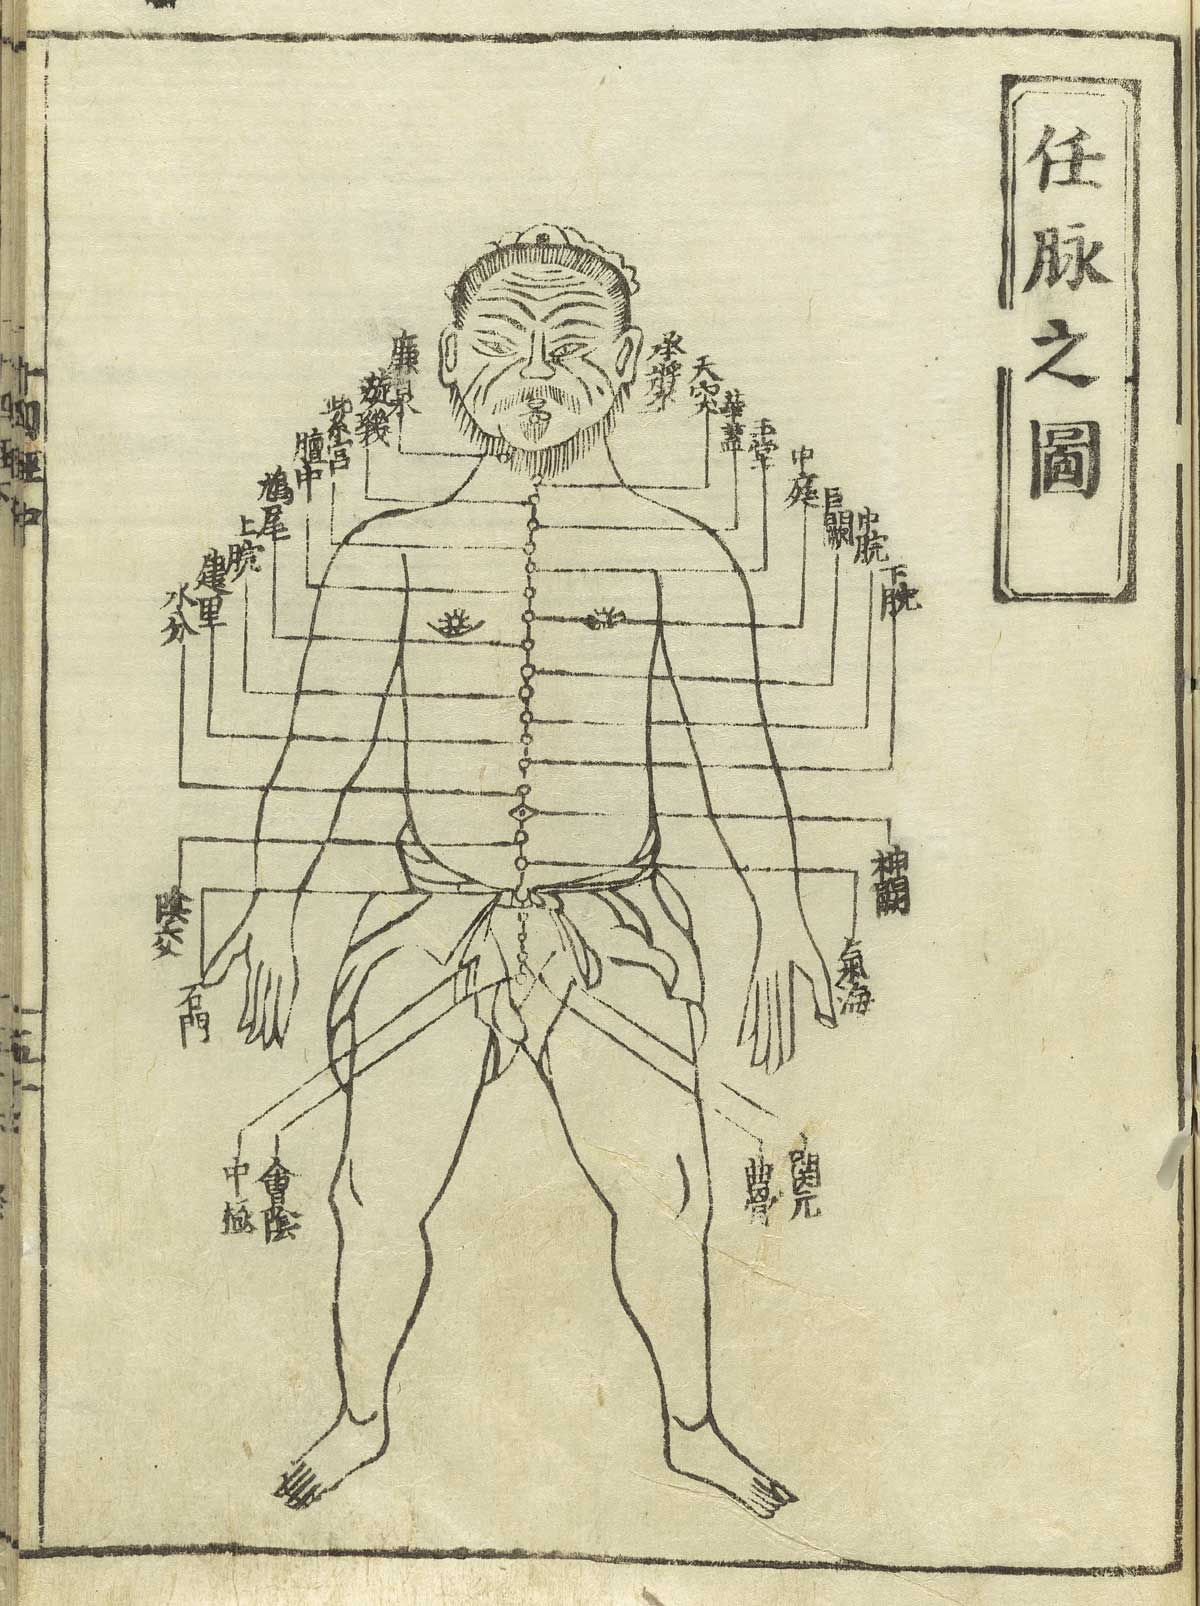 Woodcut showing the Directing vessel of a standing male facing figure wearing a loin cloth with meridians indicated down the chest with Chinese characters giving names of the points and to the right giving the title of the image, from Hua Shou’s Jushikei hakki, NLM Call no.: WZ 260 H868s 1716.